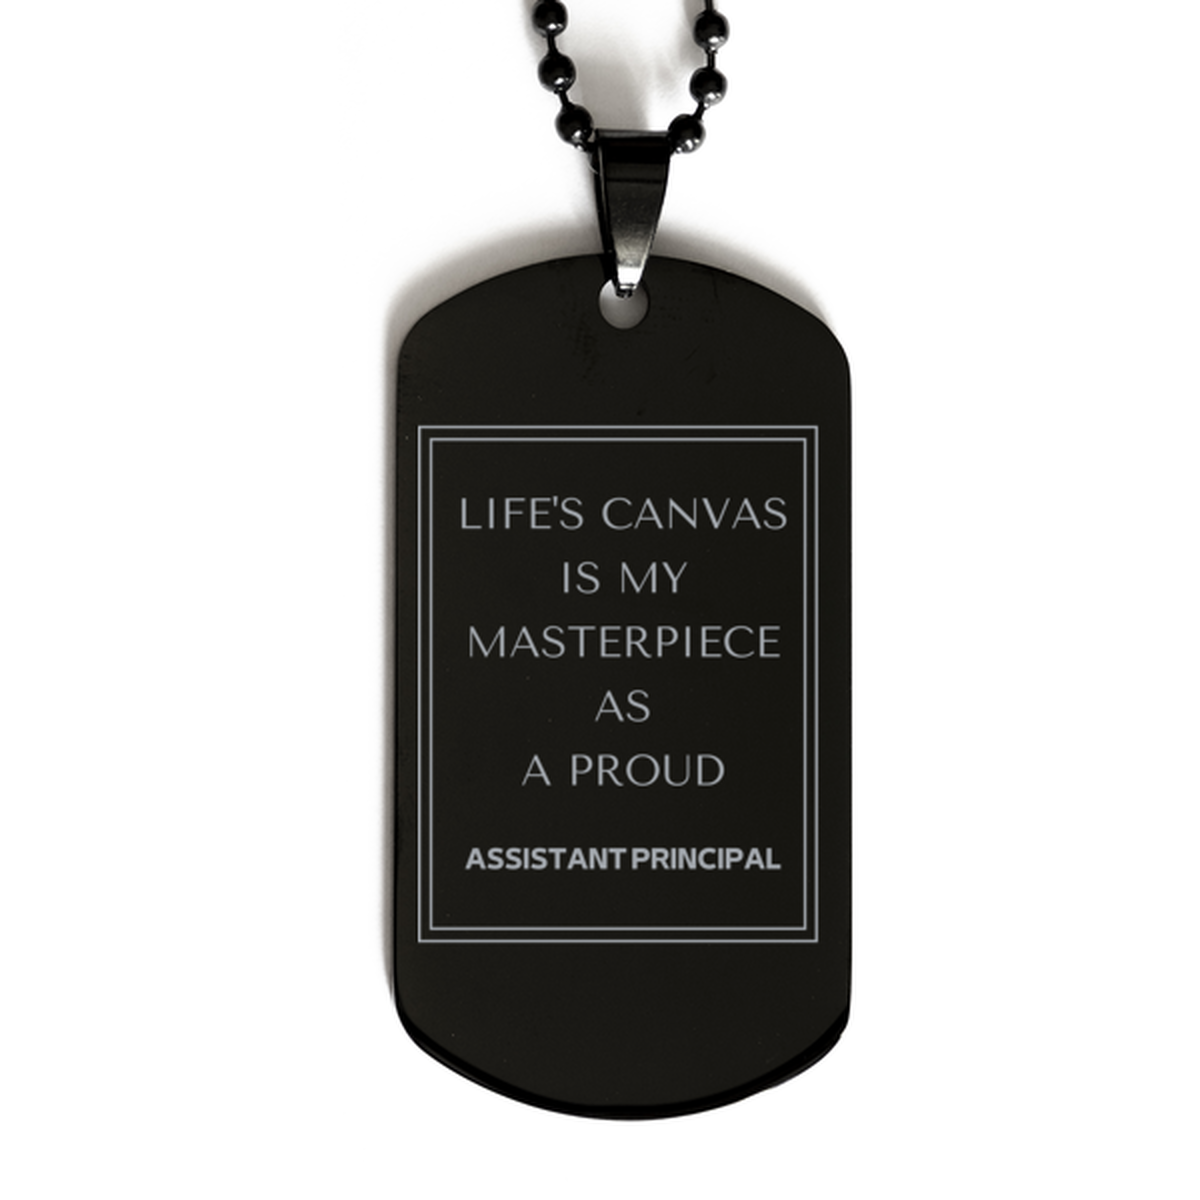 Proud Assistant Principal Gifts, Life's canvas is my masterpiece, Epic Birthday Christmas Unique Black Dog Tag For Assistant Principal, Coworkers, Men, Women, Friends